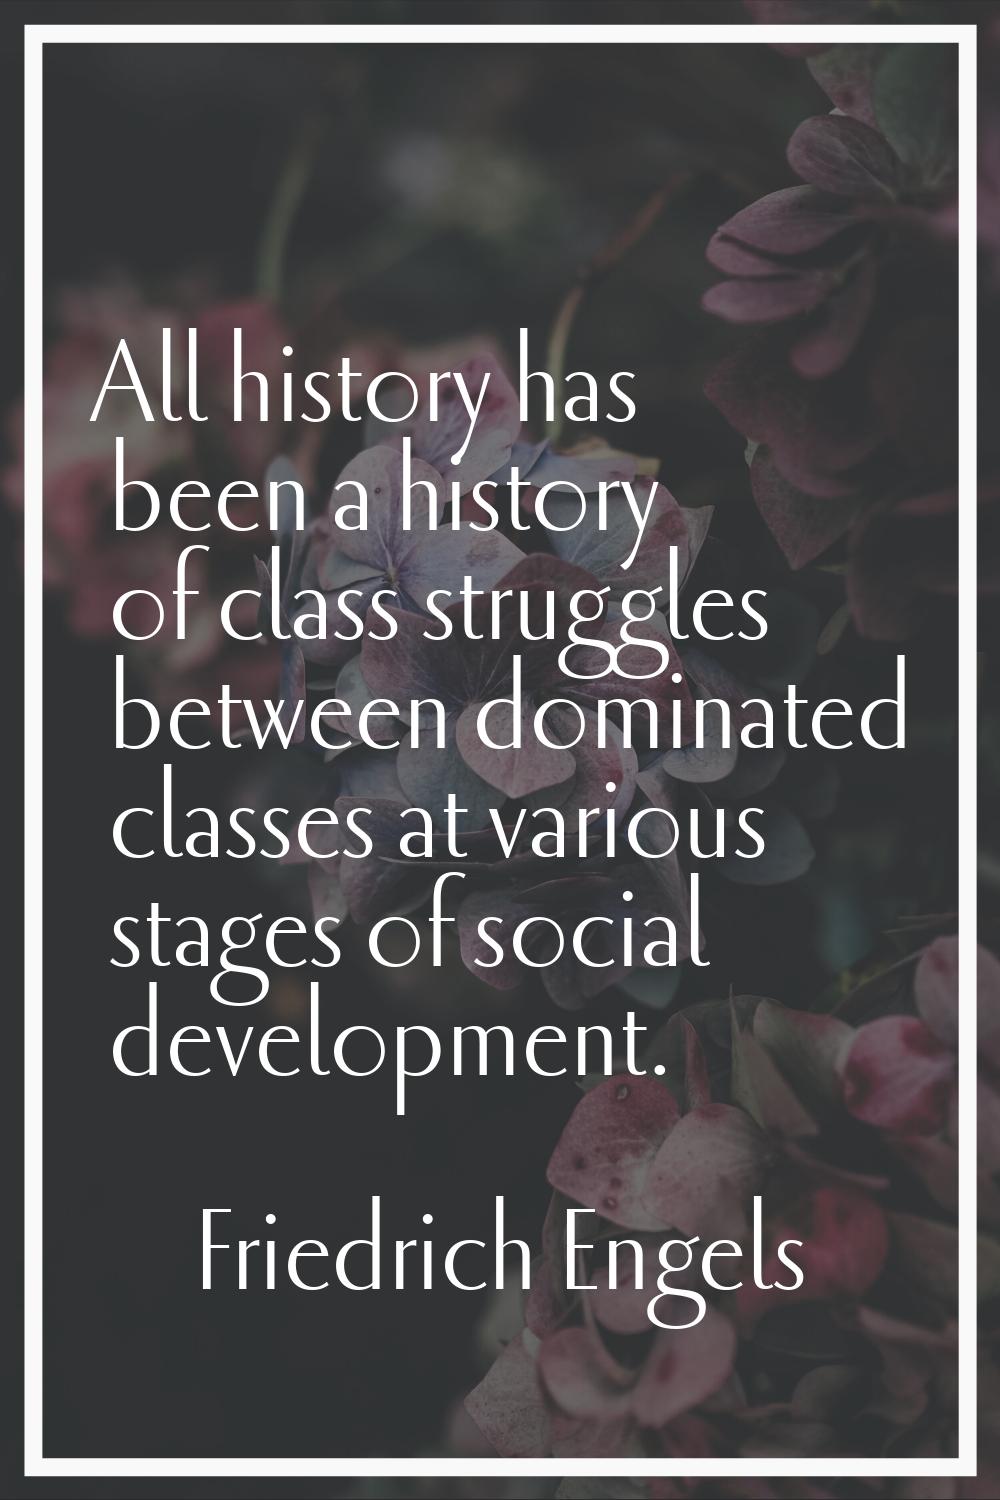 All history has been a history of class struggles between dominated classes at various stages of so